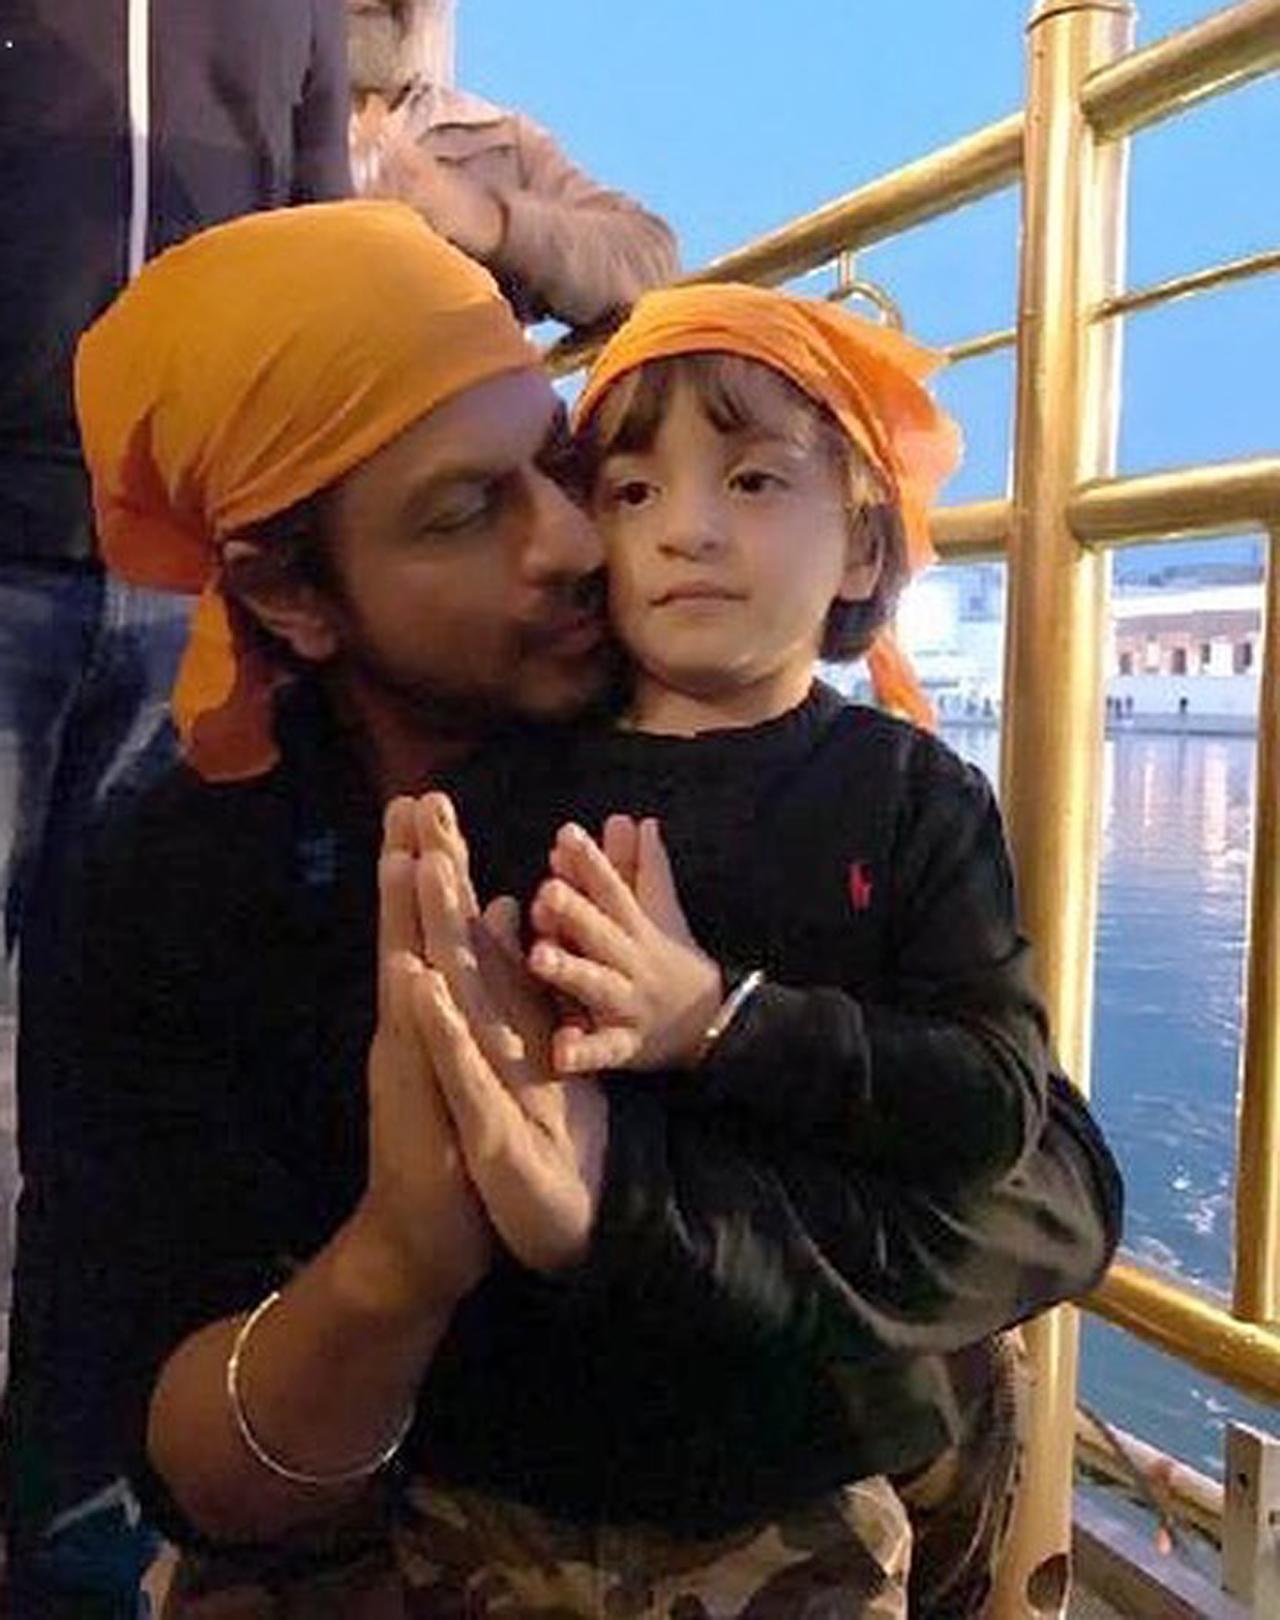 Shah Rukh Khan, AbRam Khan paid a visit to Amritsar and sought blessings of the Almighty. Khan captioned this adorable moment as- 